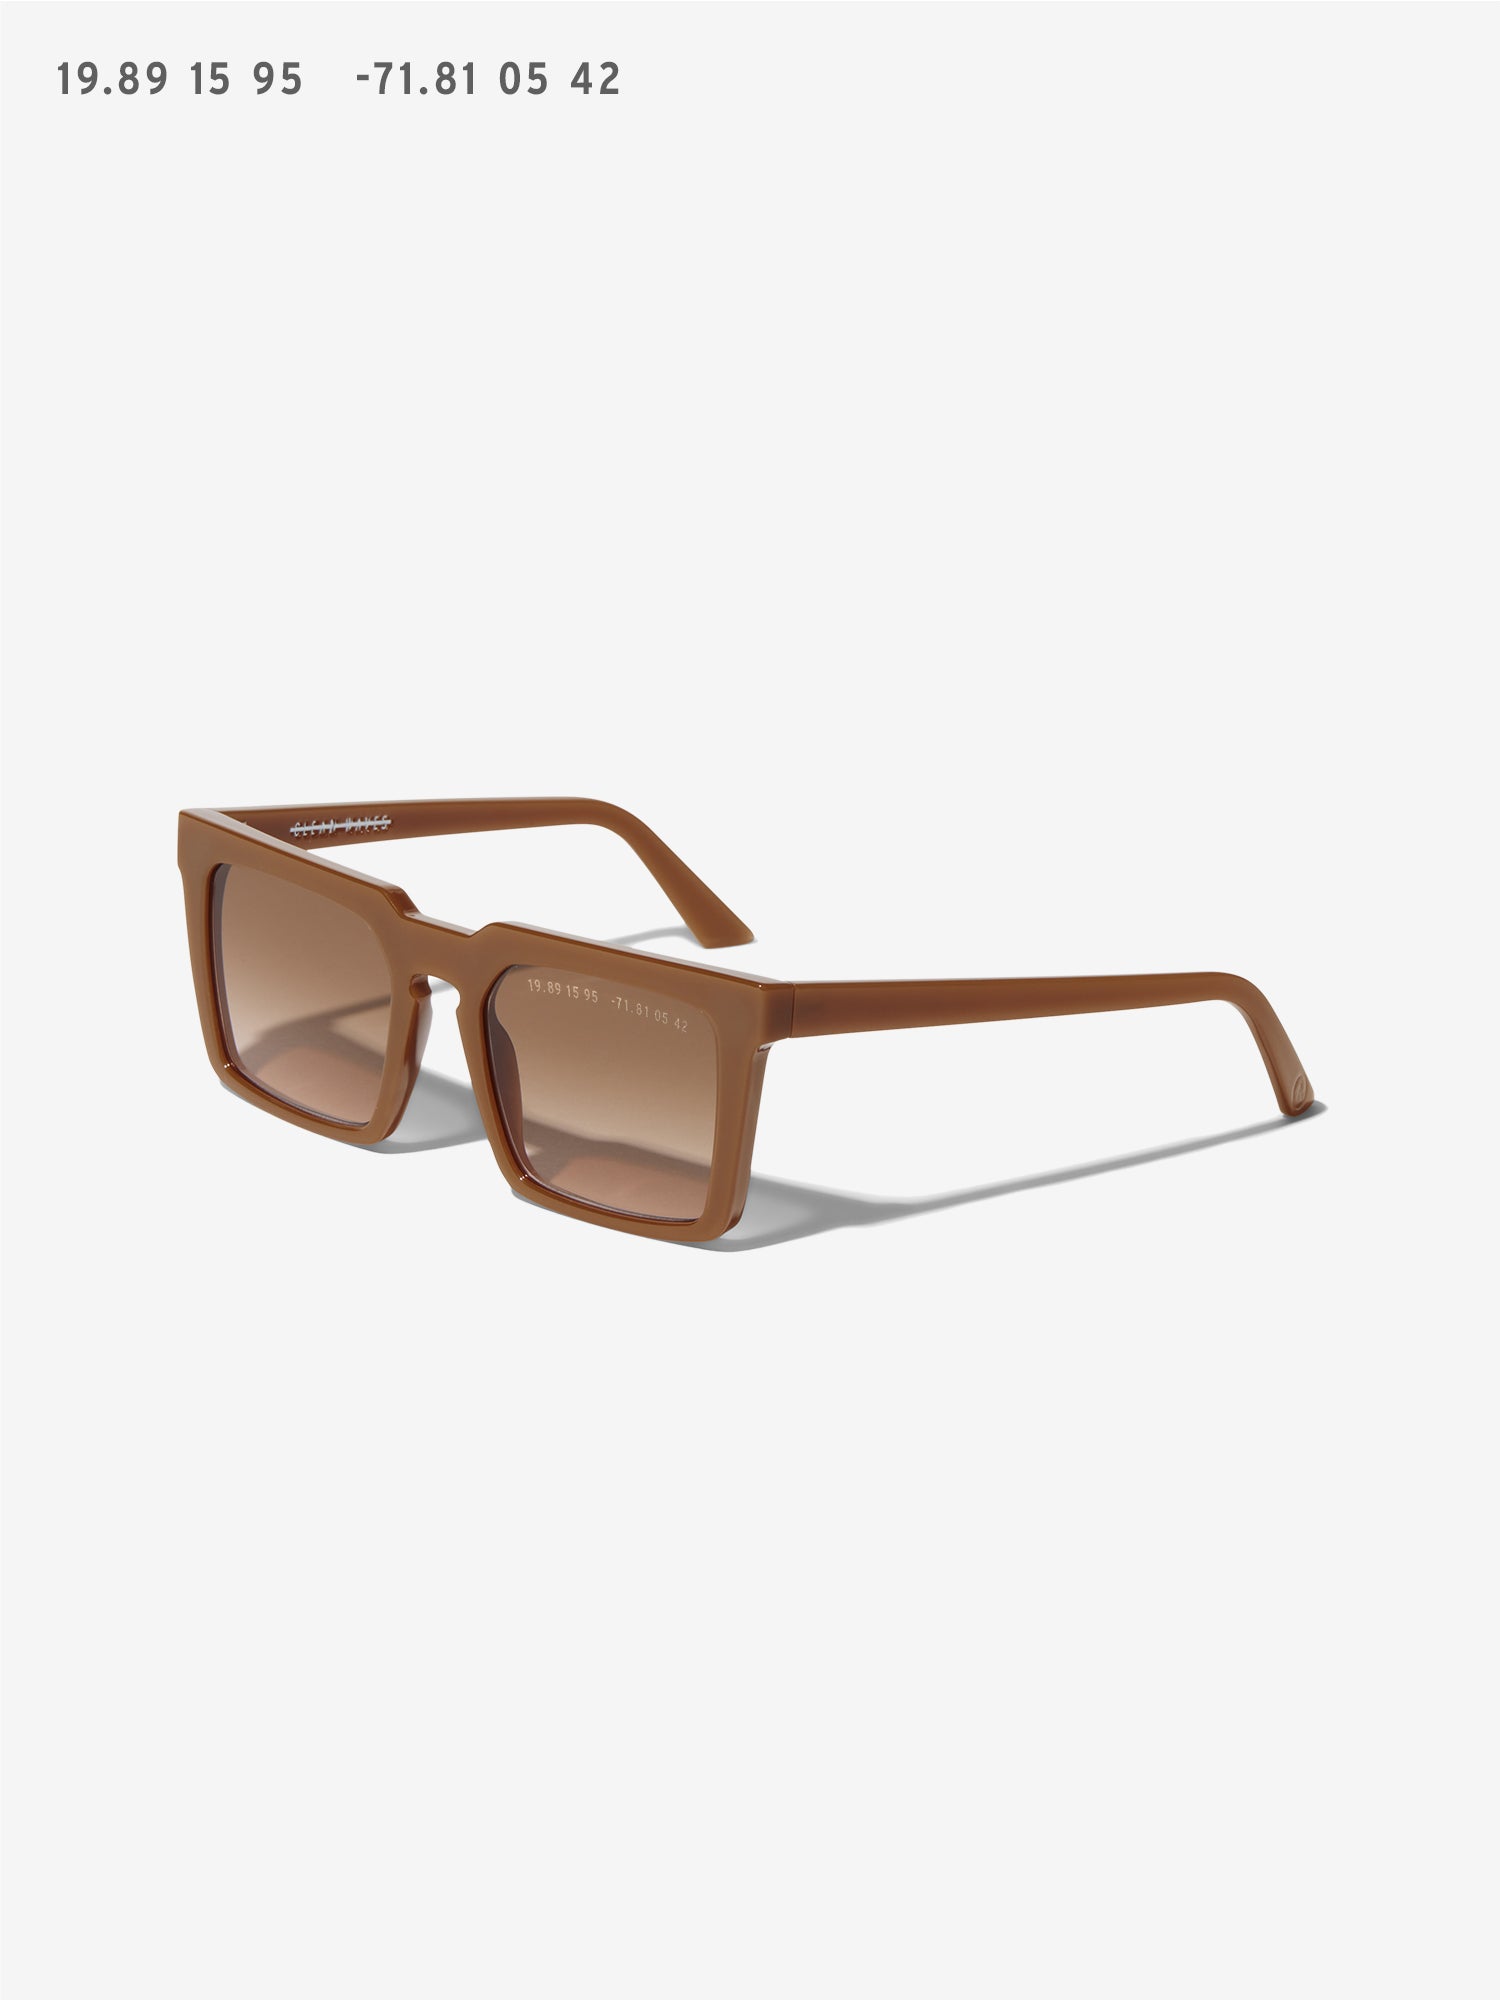 Buy Louis Vuitton Sunglasses 'White/Pink' - 0049 100000610S WHIT